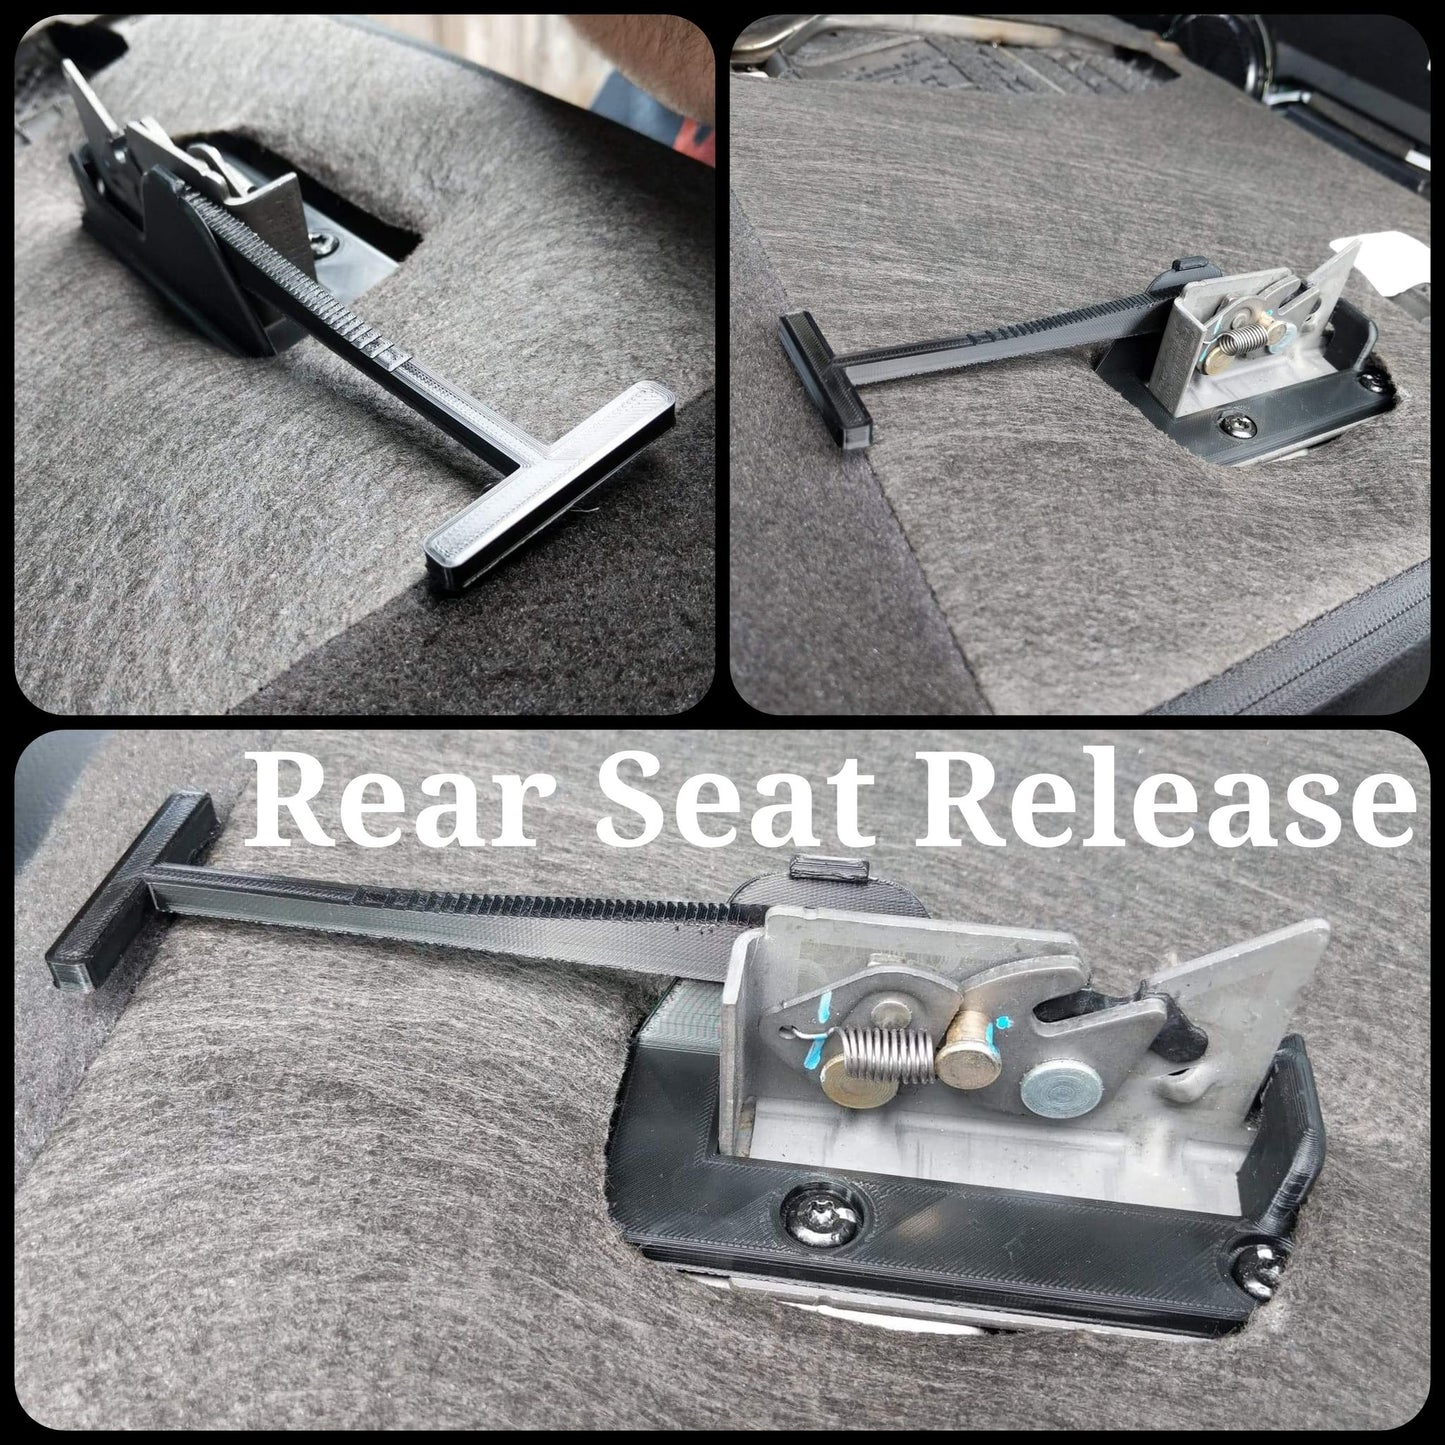 Ford Truck Rear Seat Release